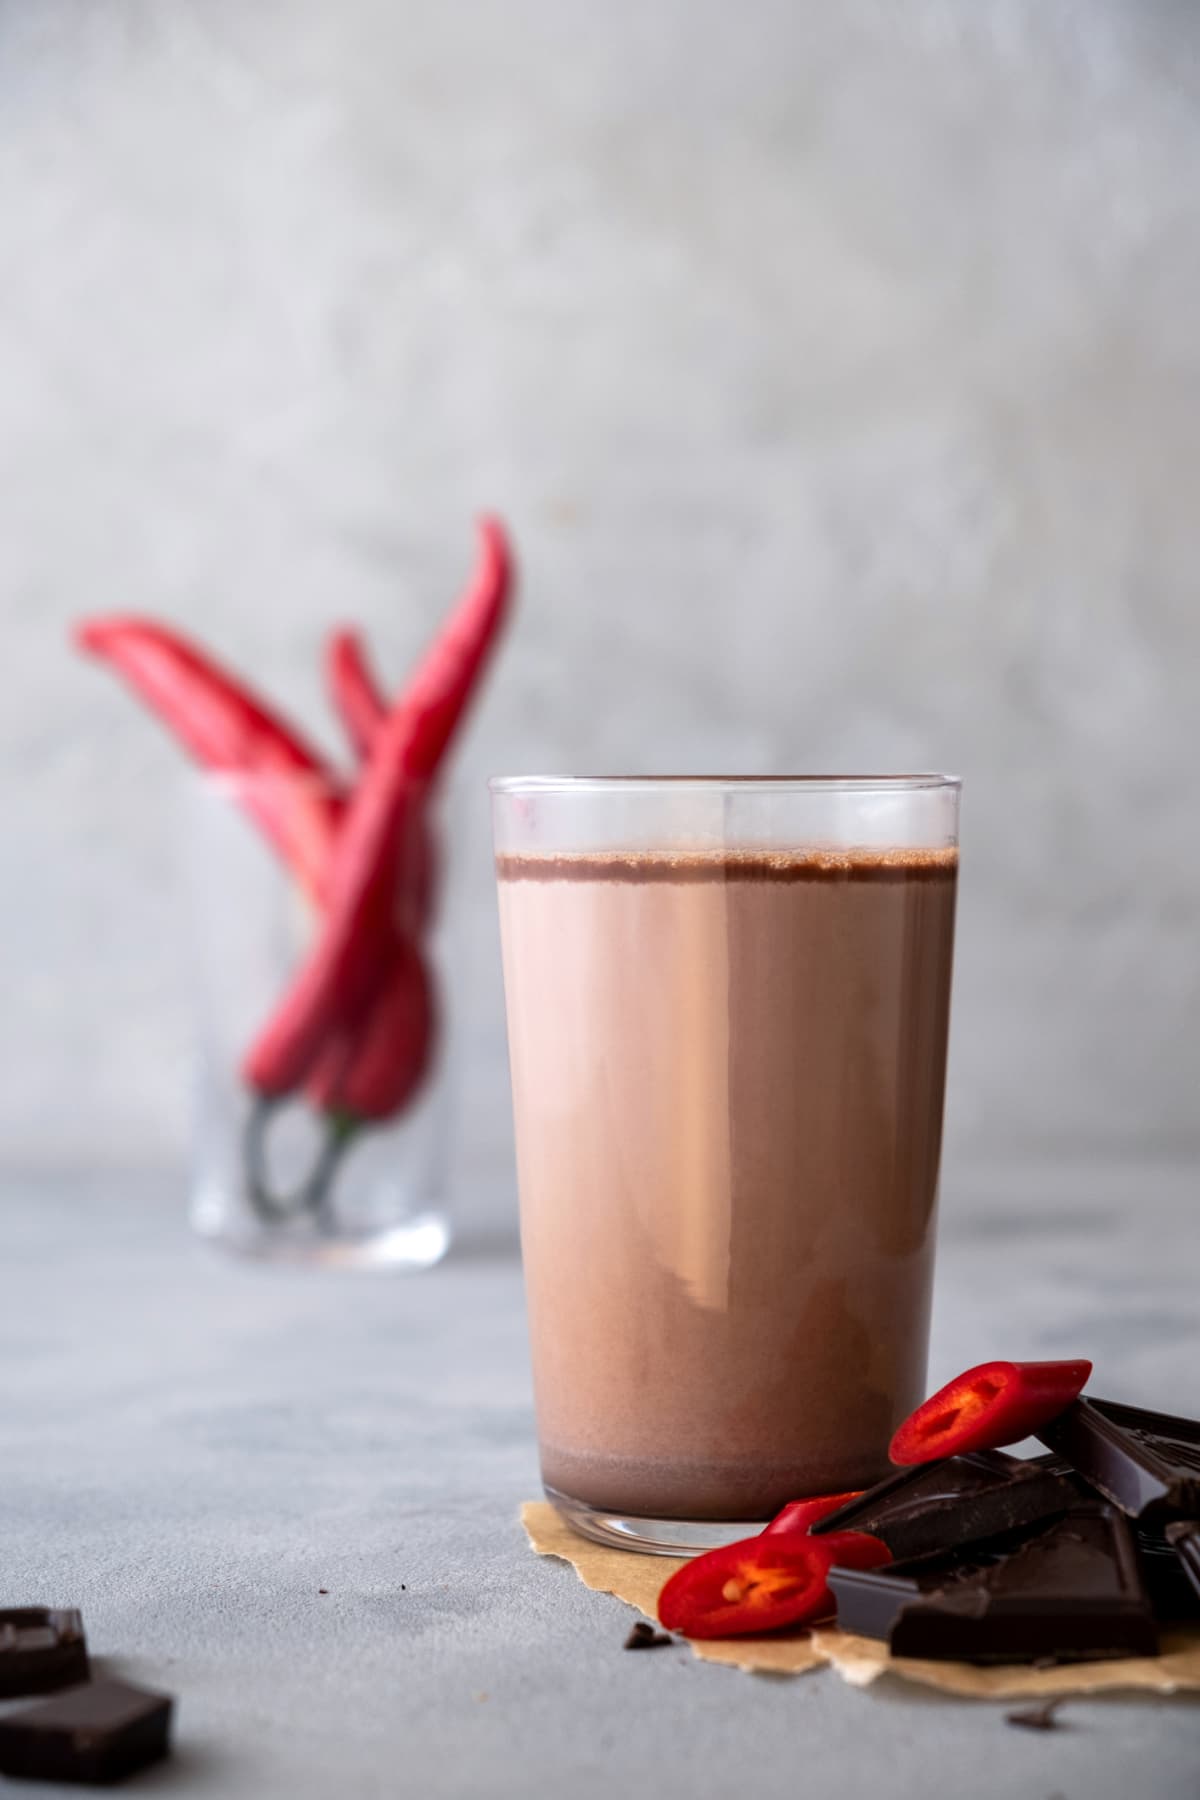 Glass of  hot chocolate, cacao drink with chili pepper. On a gray background